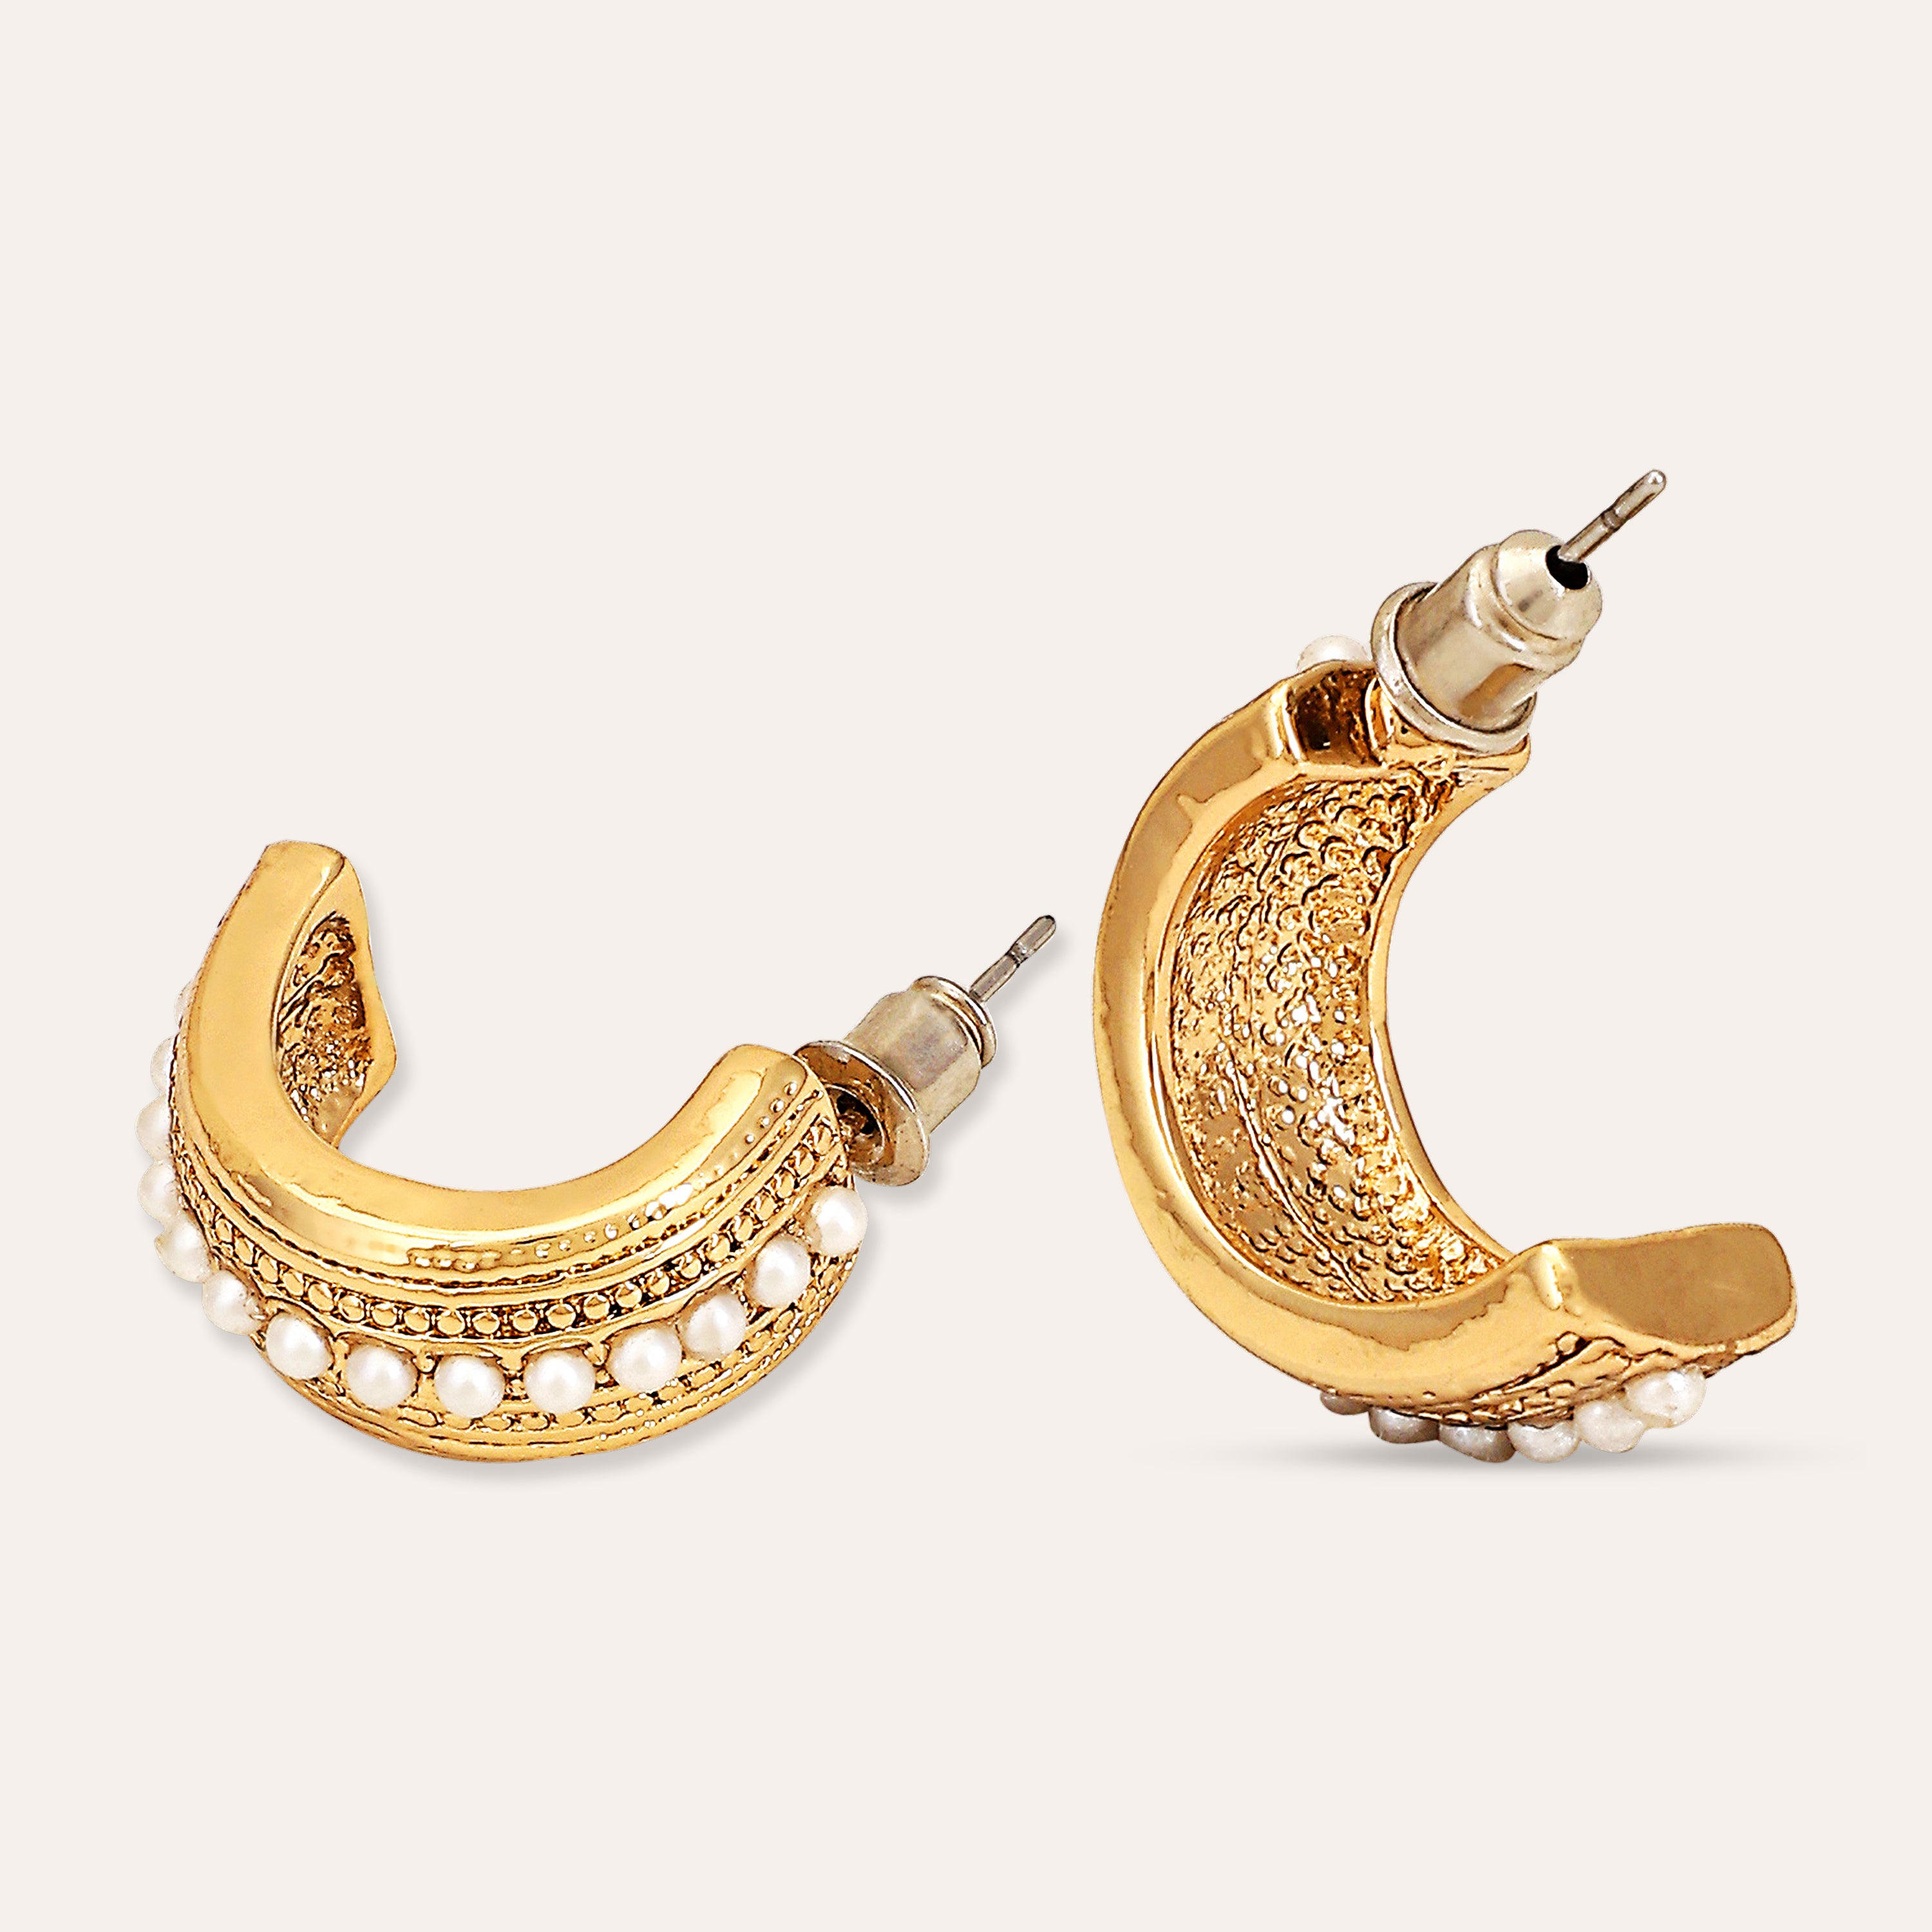 TFC Pretty Posies Gold Plated Pearl Stud Earrings-Discover daily wear gold earrings including stud earrings, hoop earrings, and pearl earrings, perfect as earrings for women and earrings for girls.Find the cheapest fashion jewellery which is anti-tarnis​h only at The Fun company.